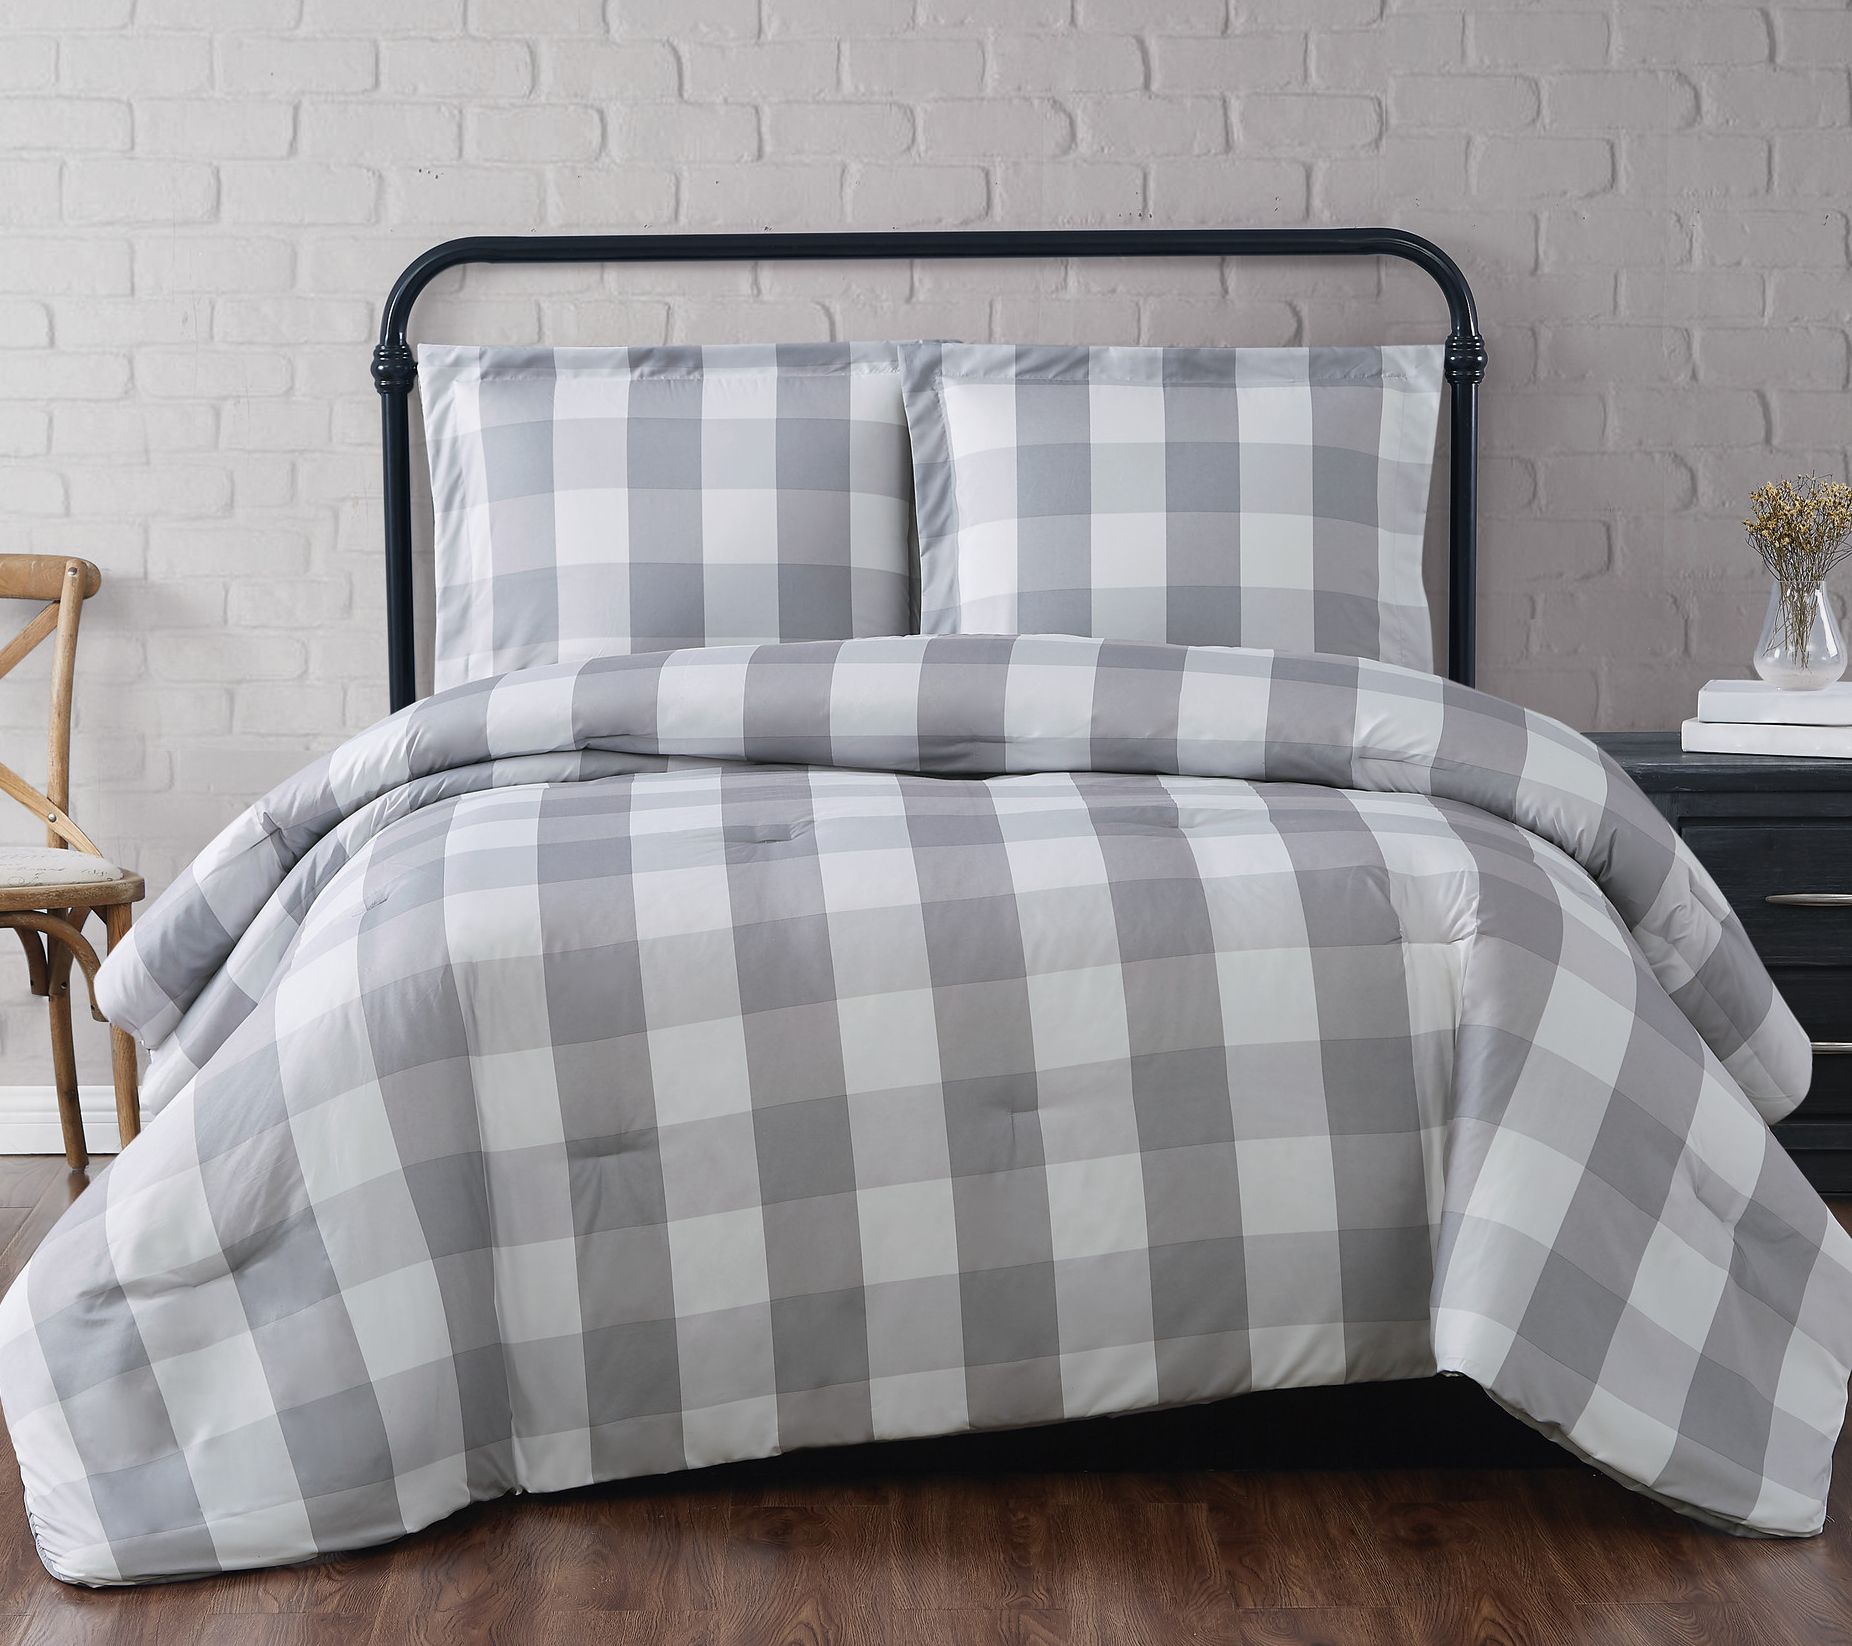 Details about   Gray Black Plaid Buffalo Check 3pc Comforter Set Twin XL Full Queen Cal King Bed 